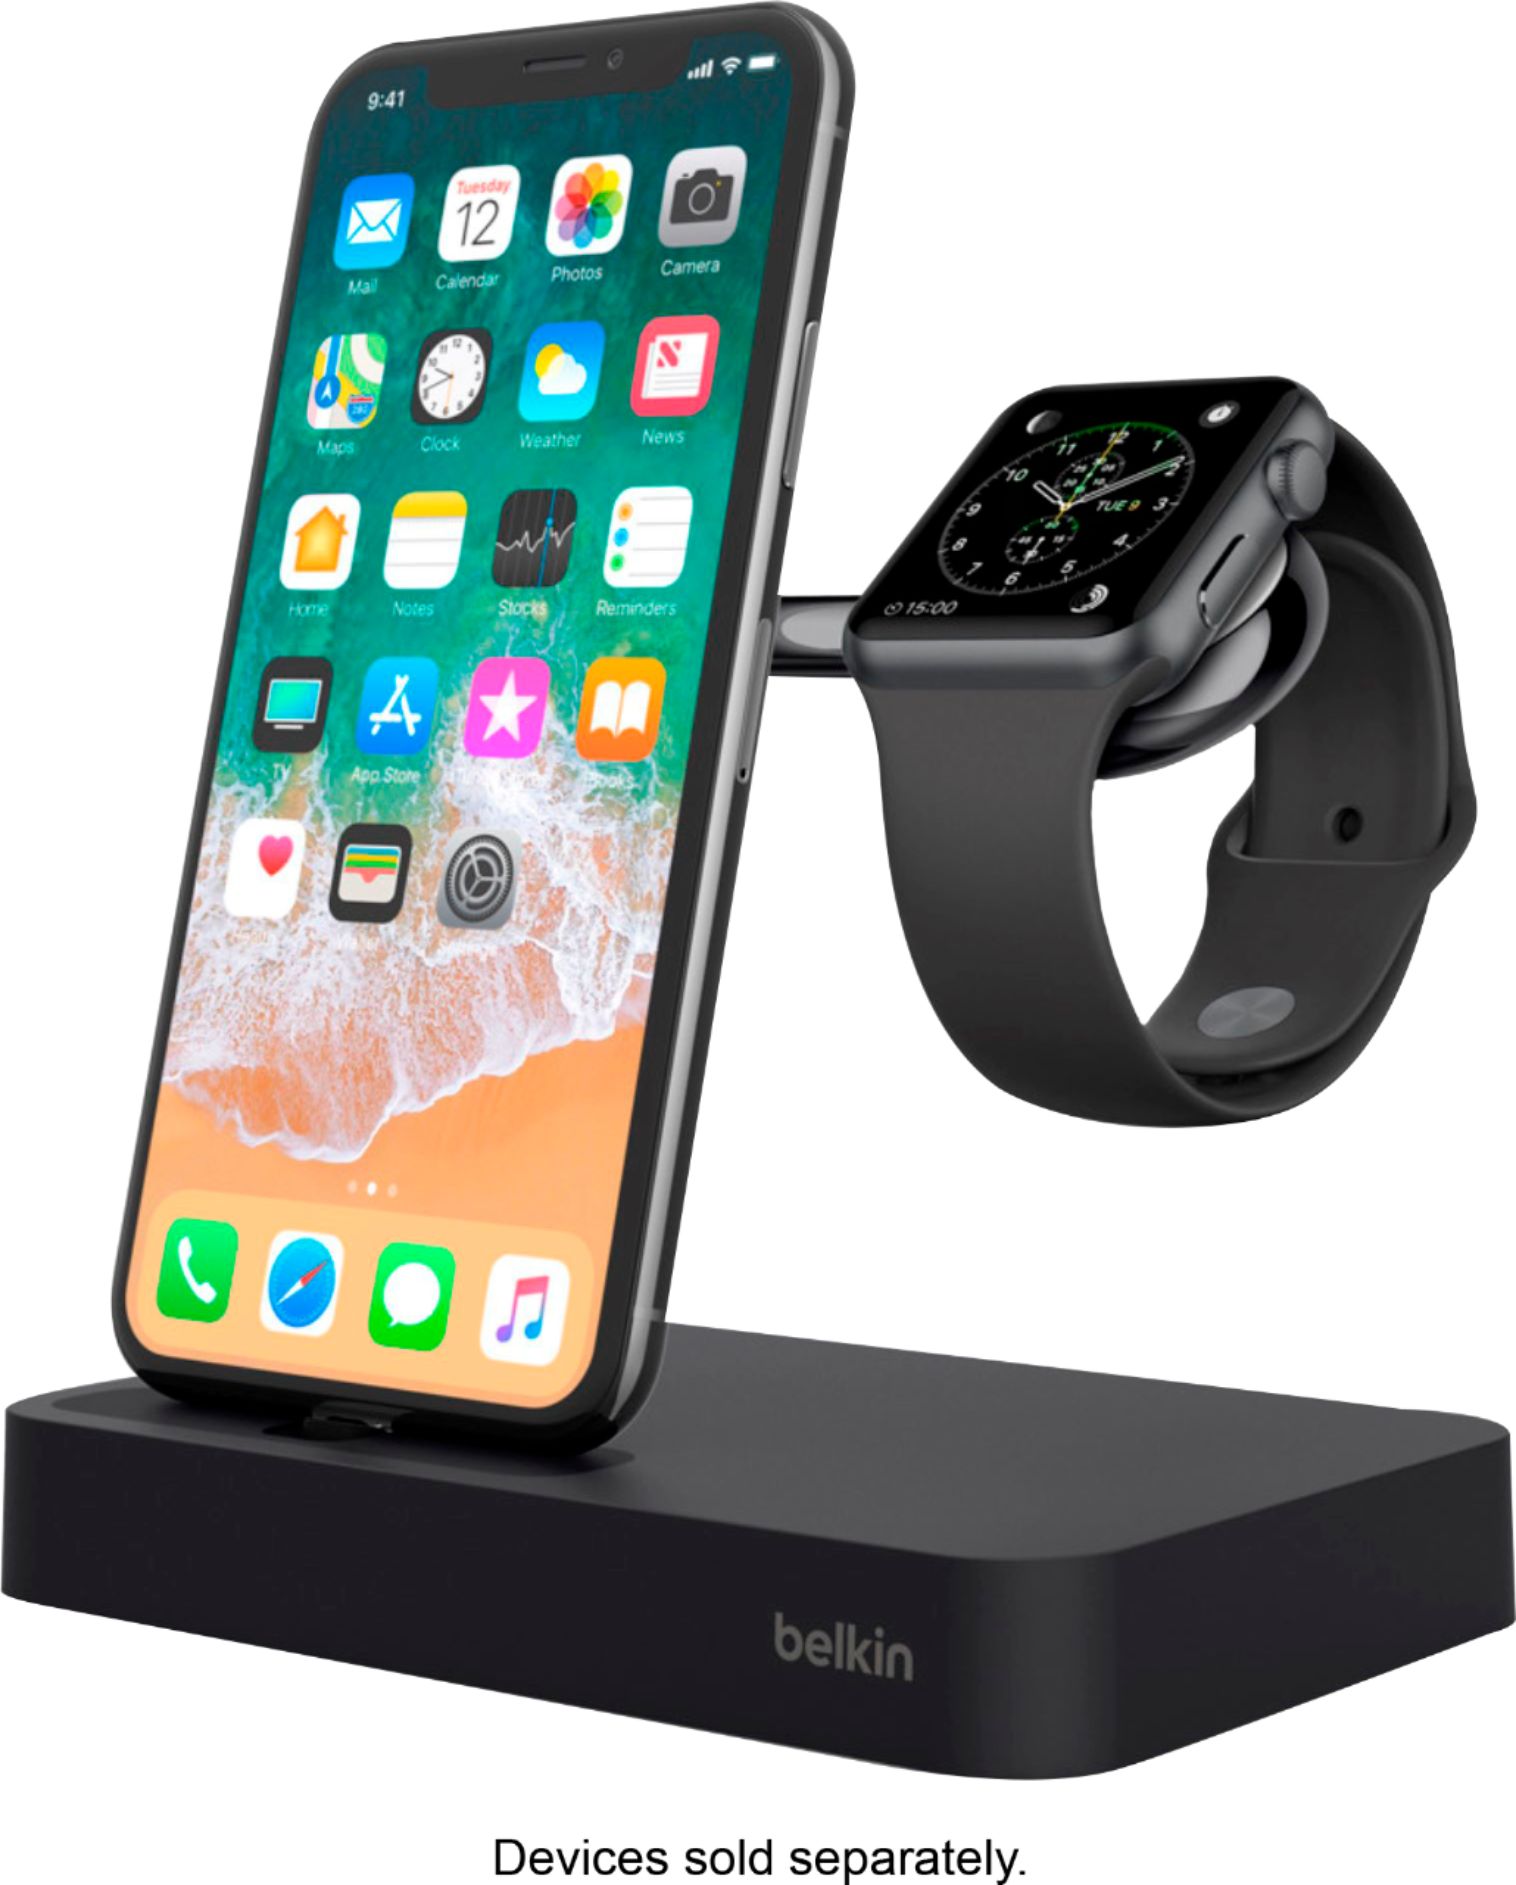 Belkin - Valet Charging Dock for iPhone and Apple Watch - Black